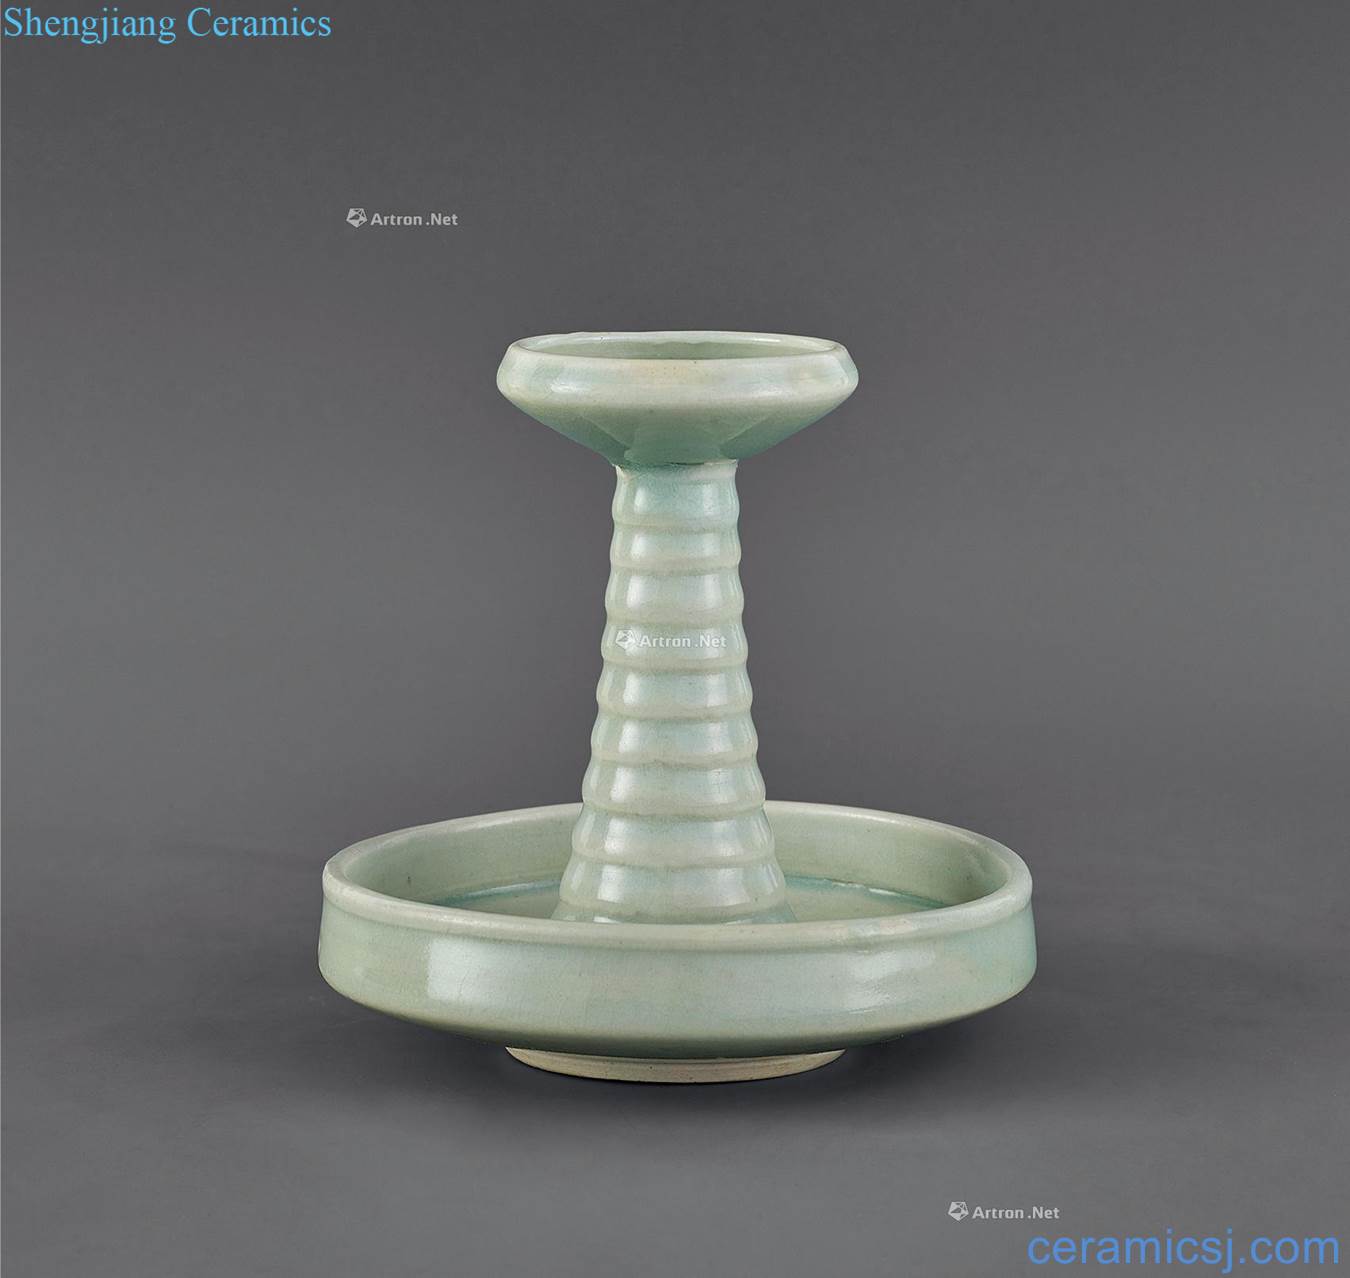 The southern song dynasty Left kiln candlestick